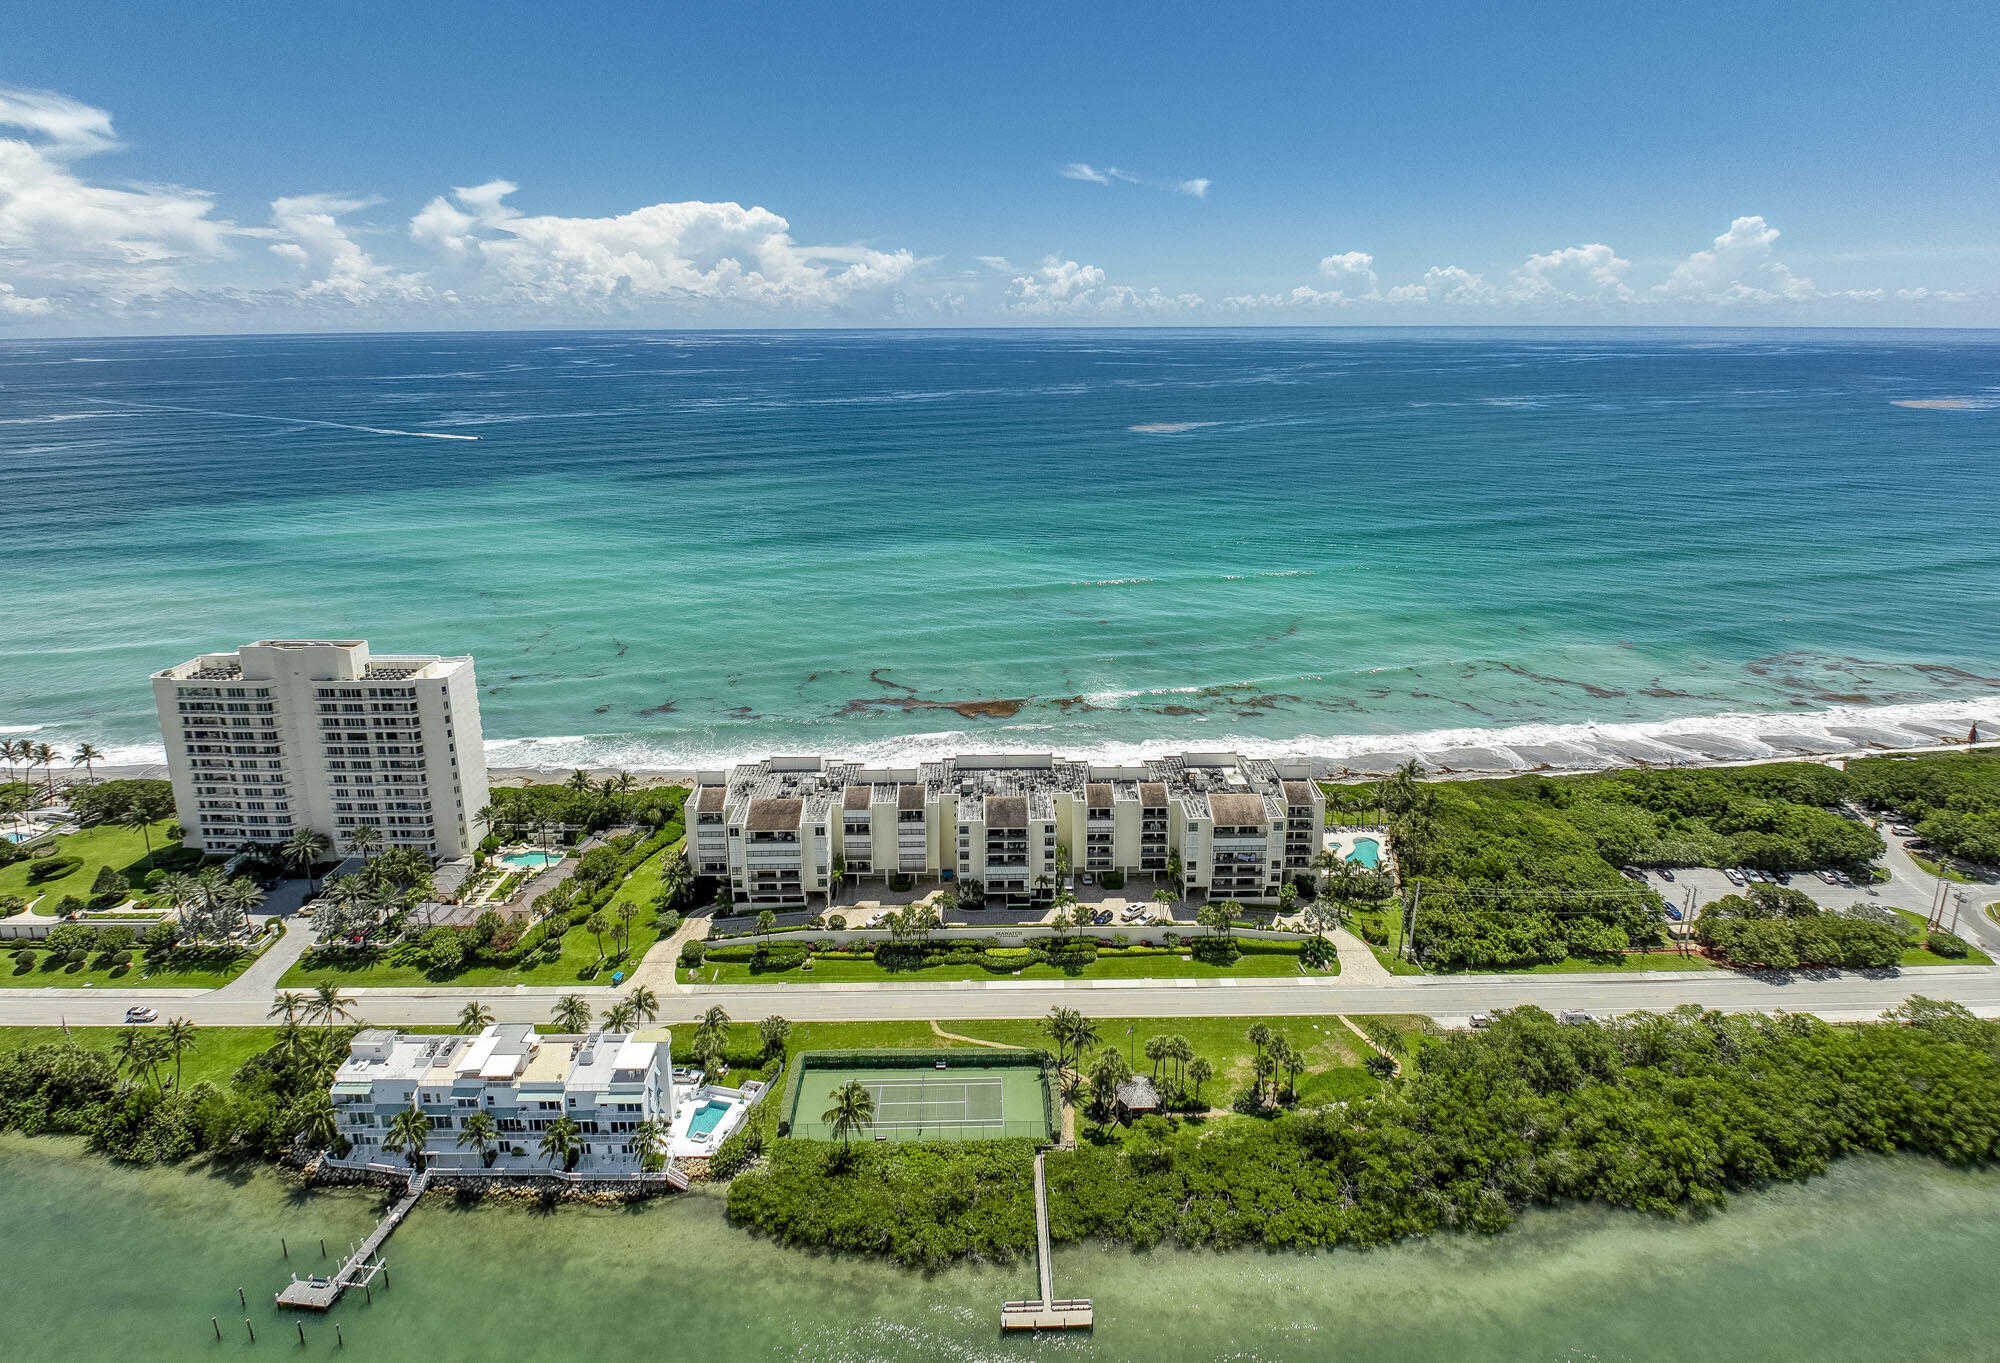 View Tequesta, FL 33469 residential property